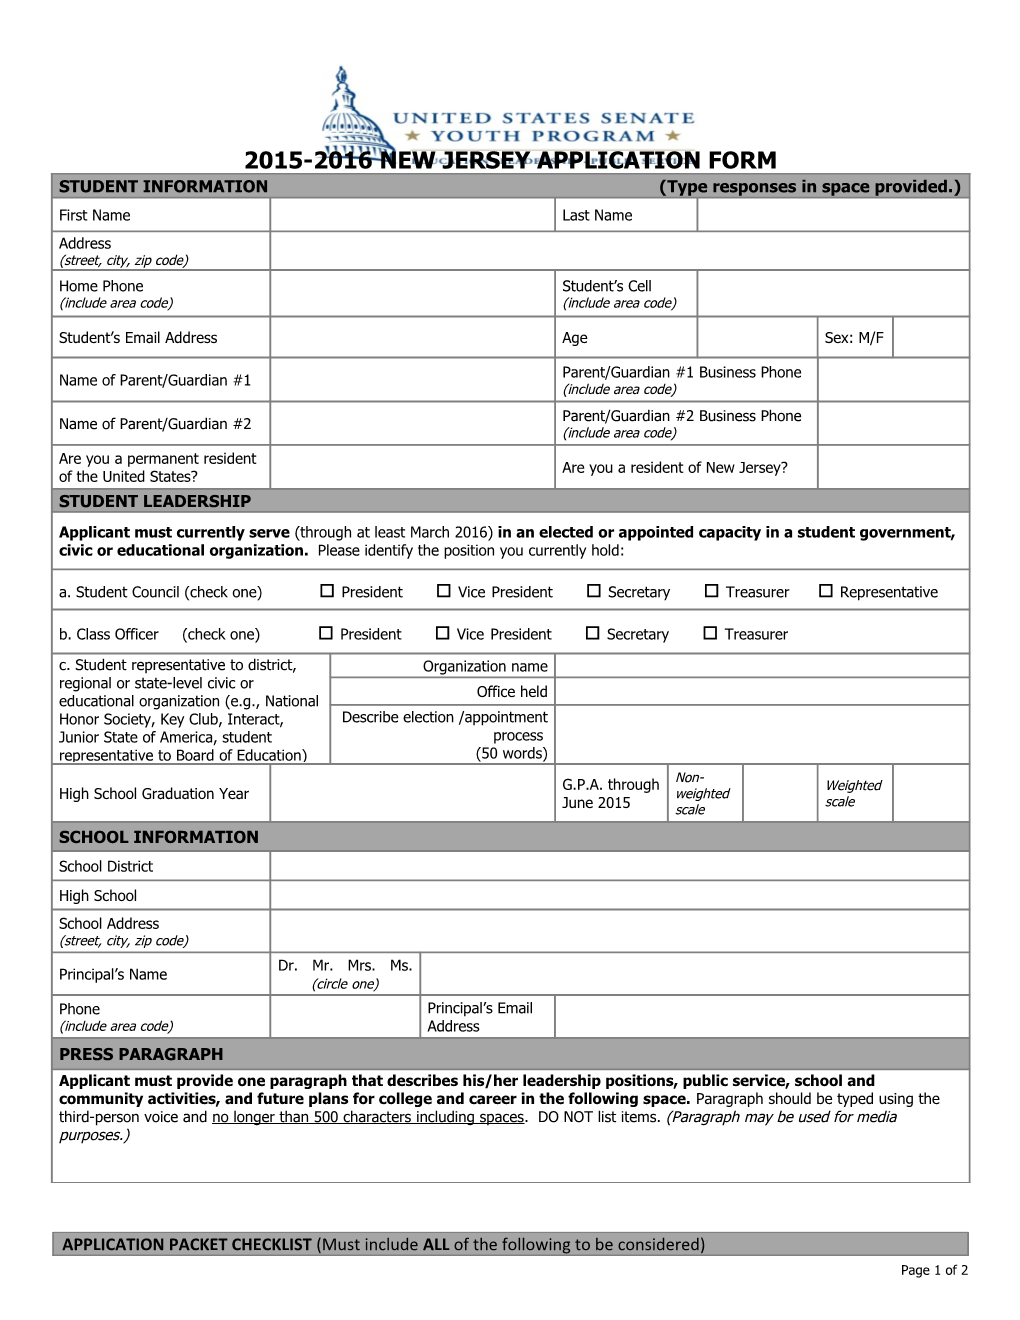 2015-2016 New Jersey Application Form